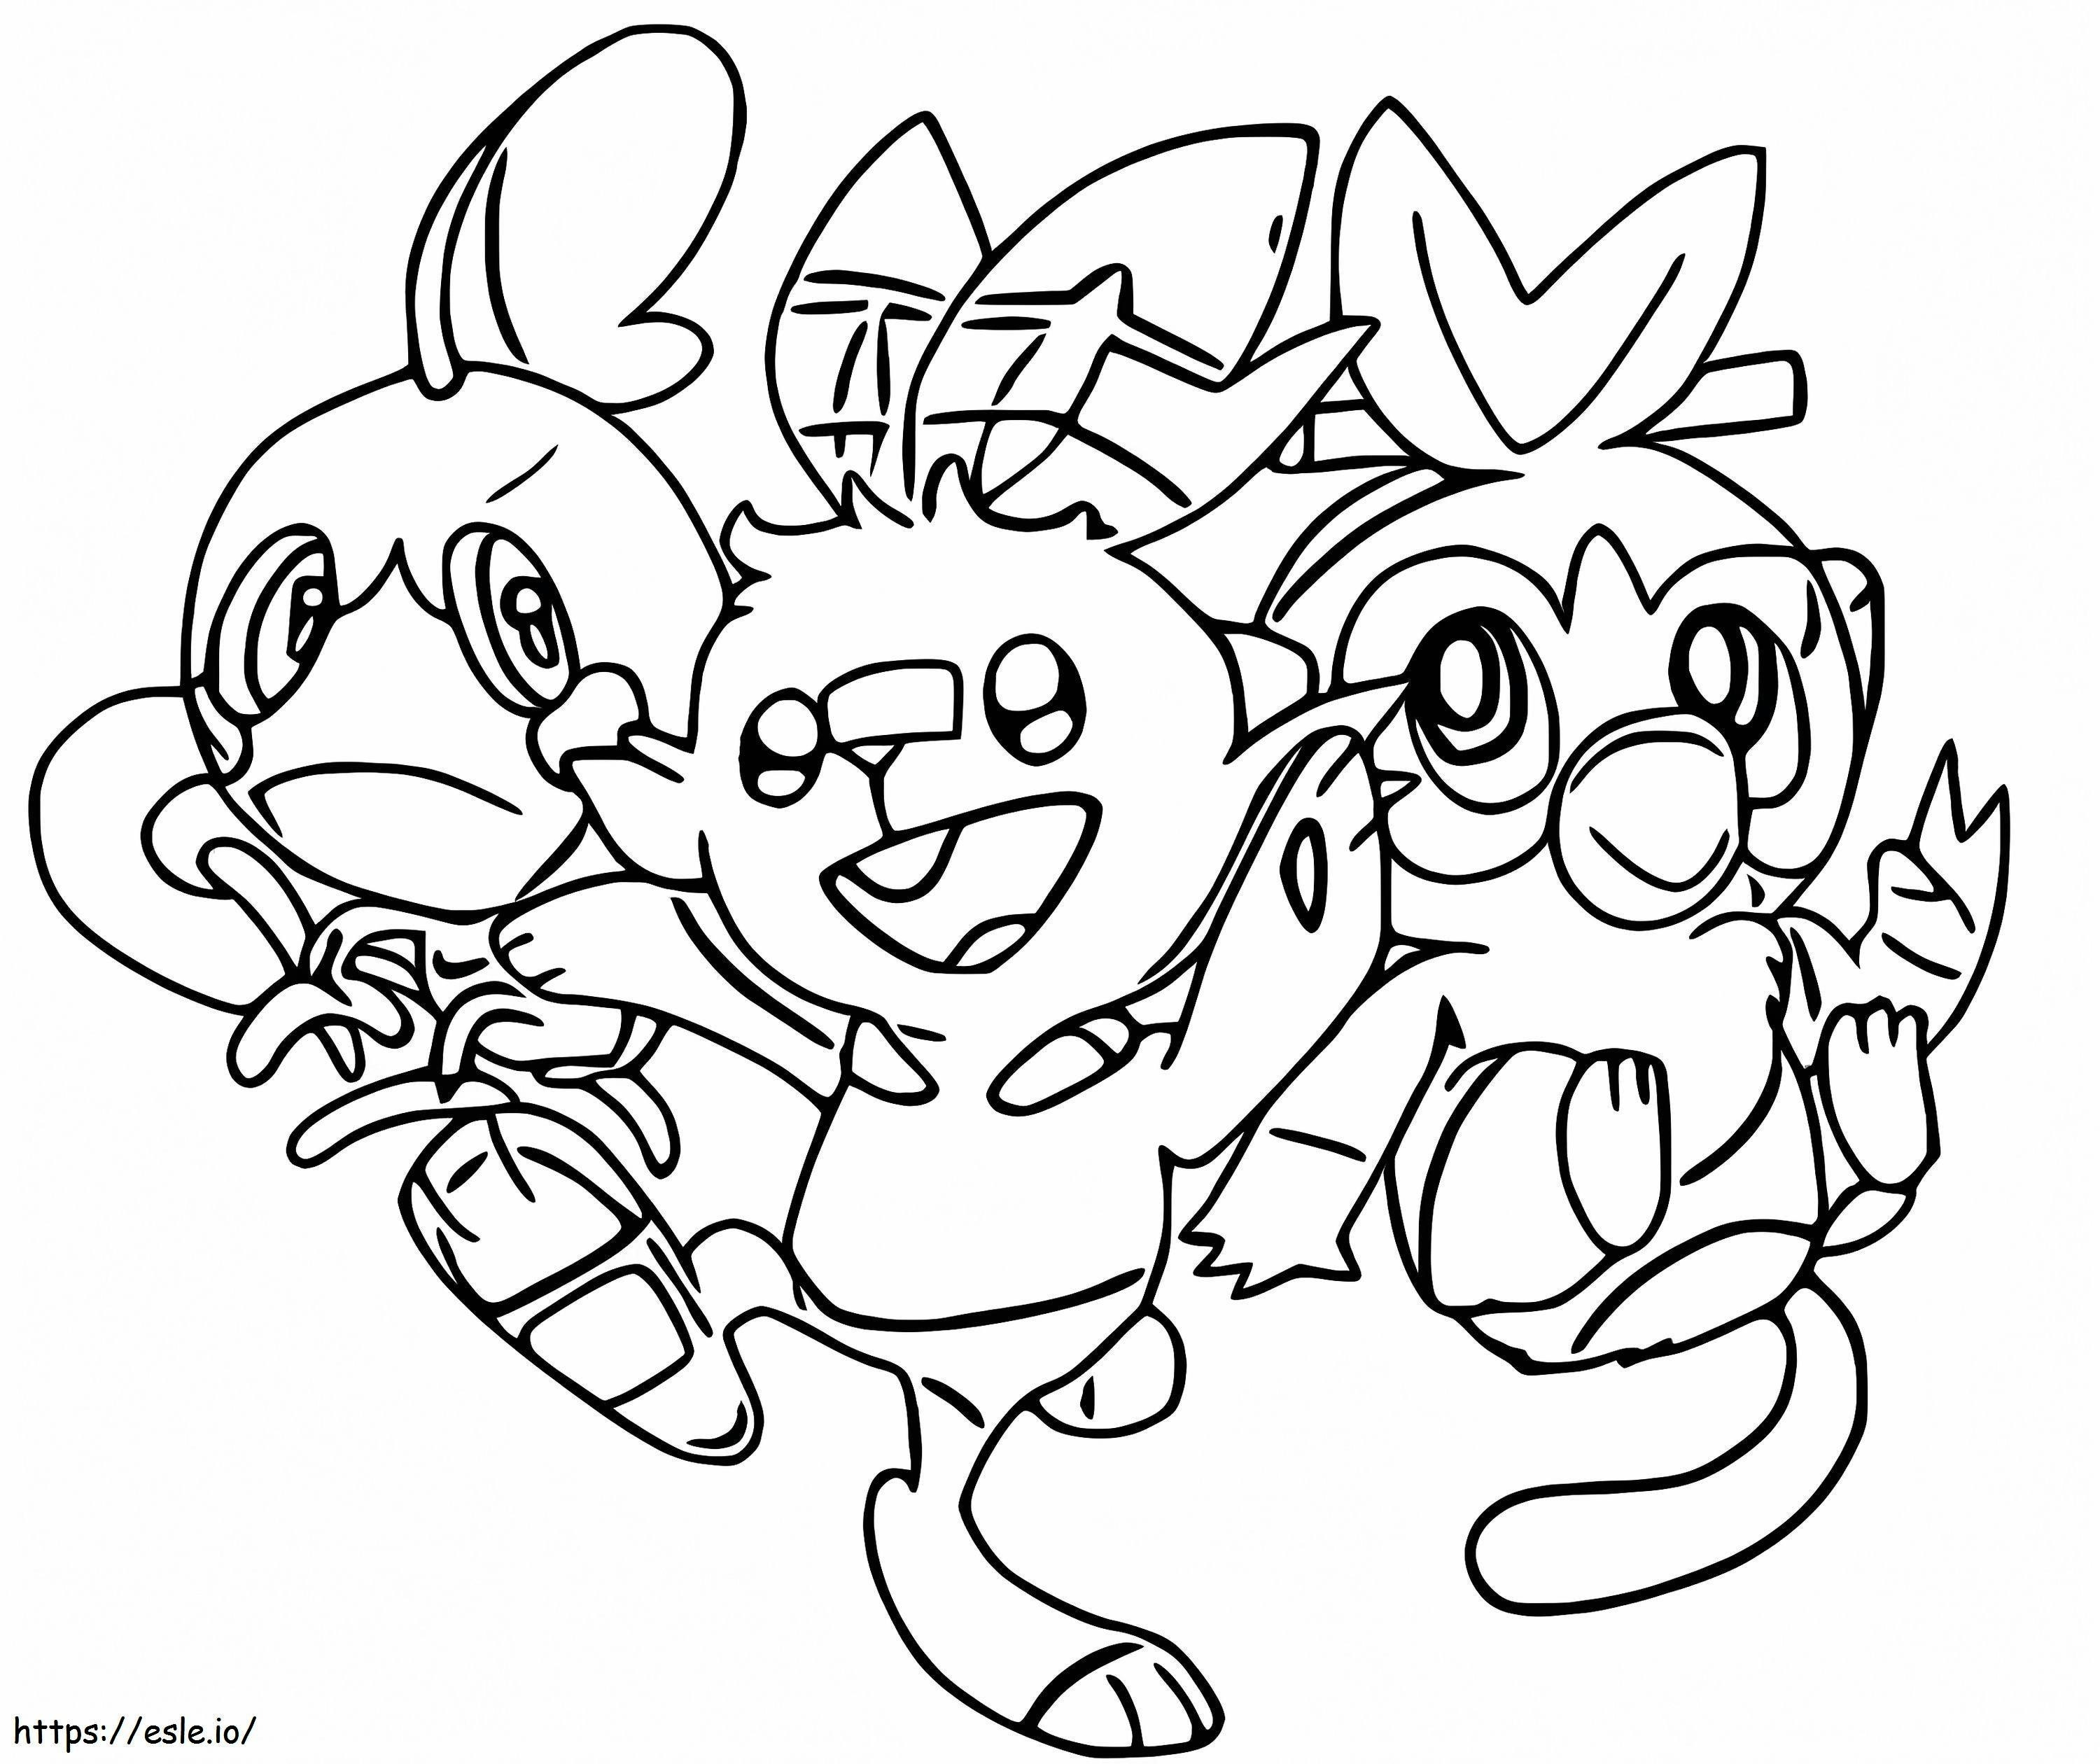 Sobble 5 coloring page